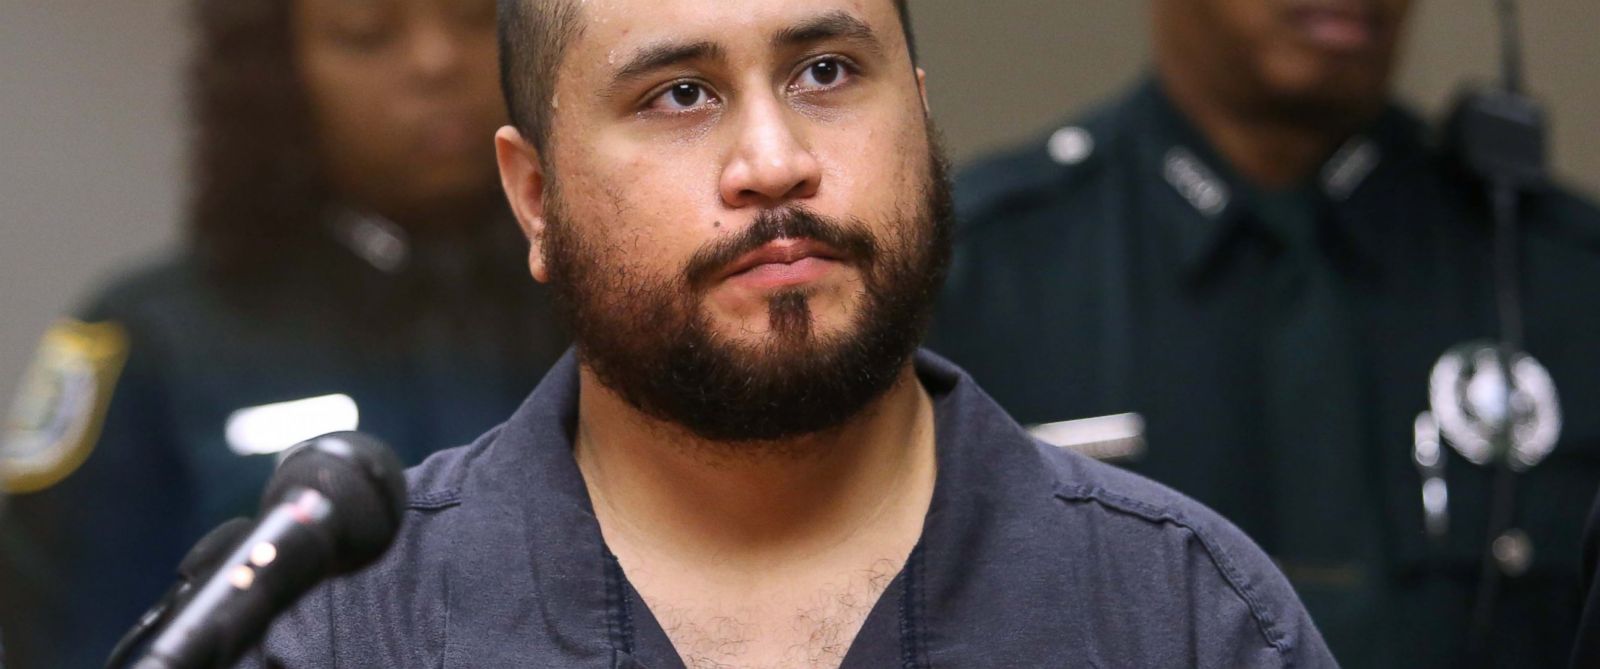 George Zimmerman’s Gun Used in Trayvon Martin’s Death to Be Auctioned Off